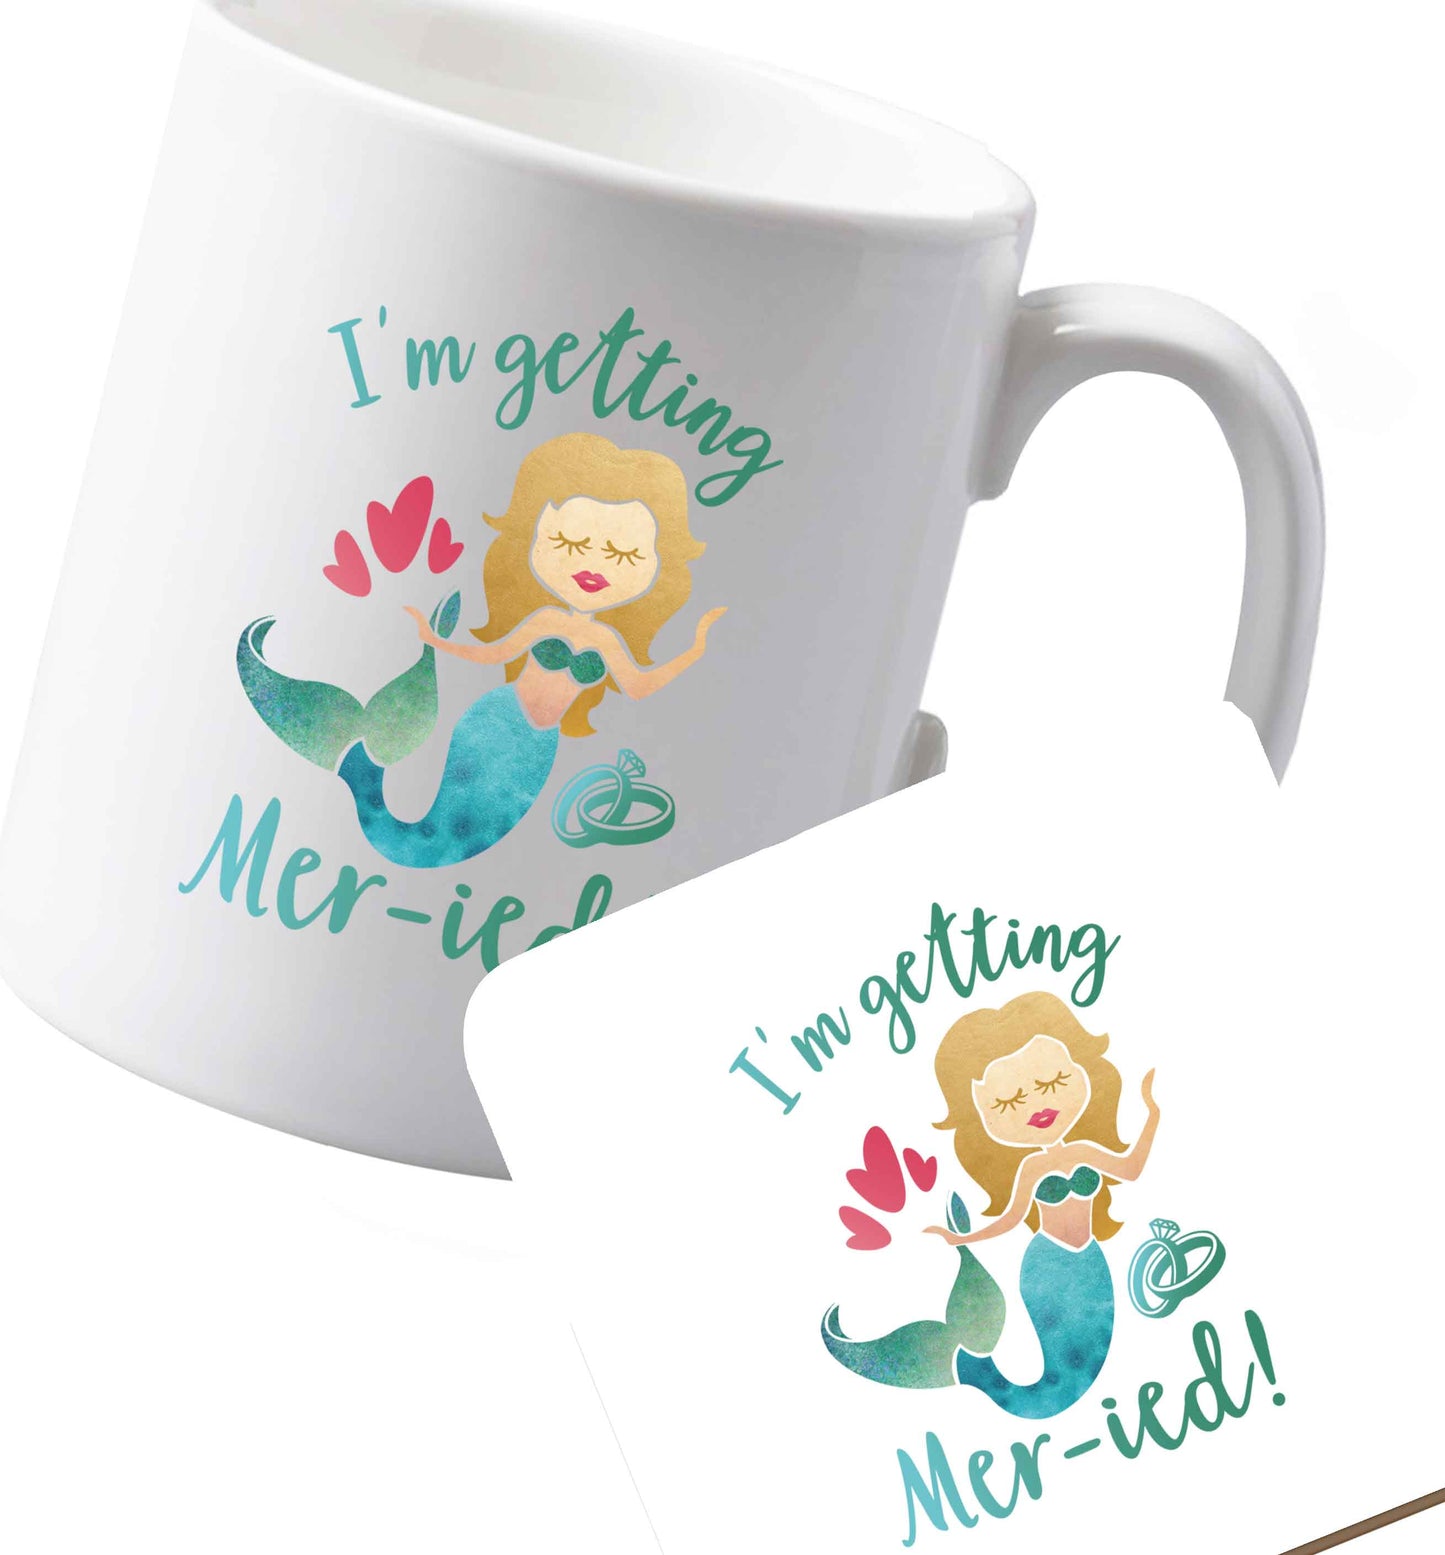 10 oz Ceramic mug and coaster Personalised wedding thank you's Mr and Mrs wedding and date! Ideal wedding favours!   both sides